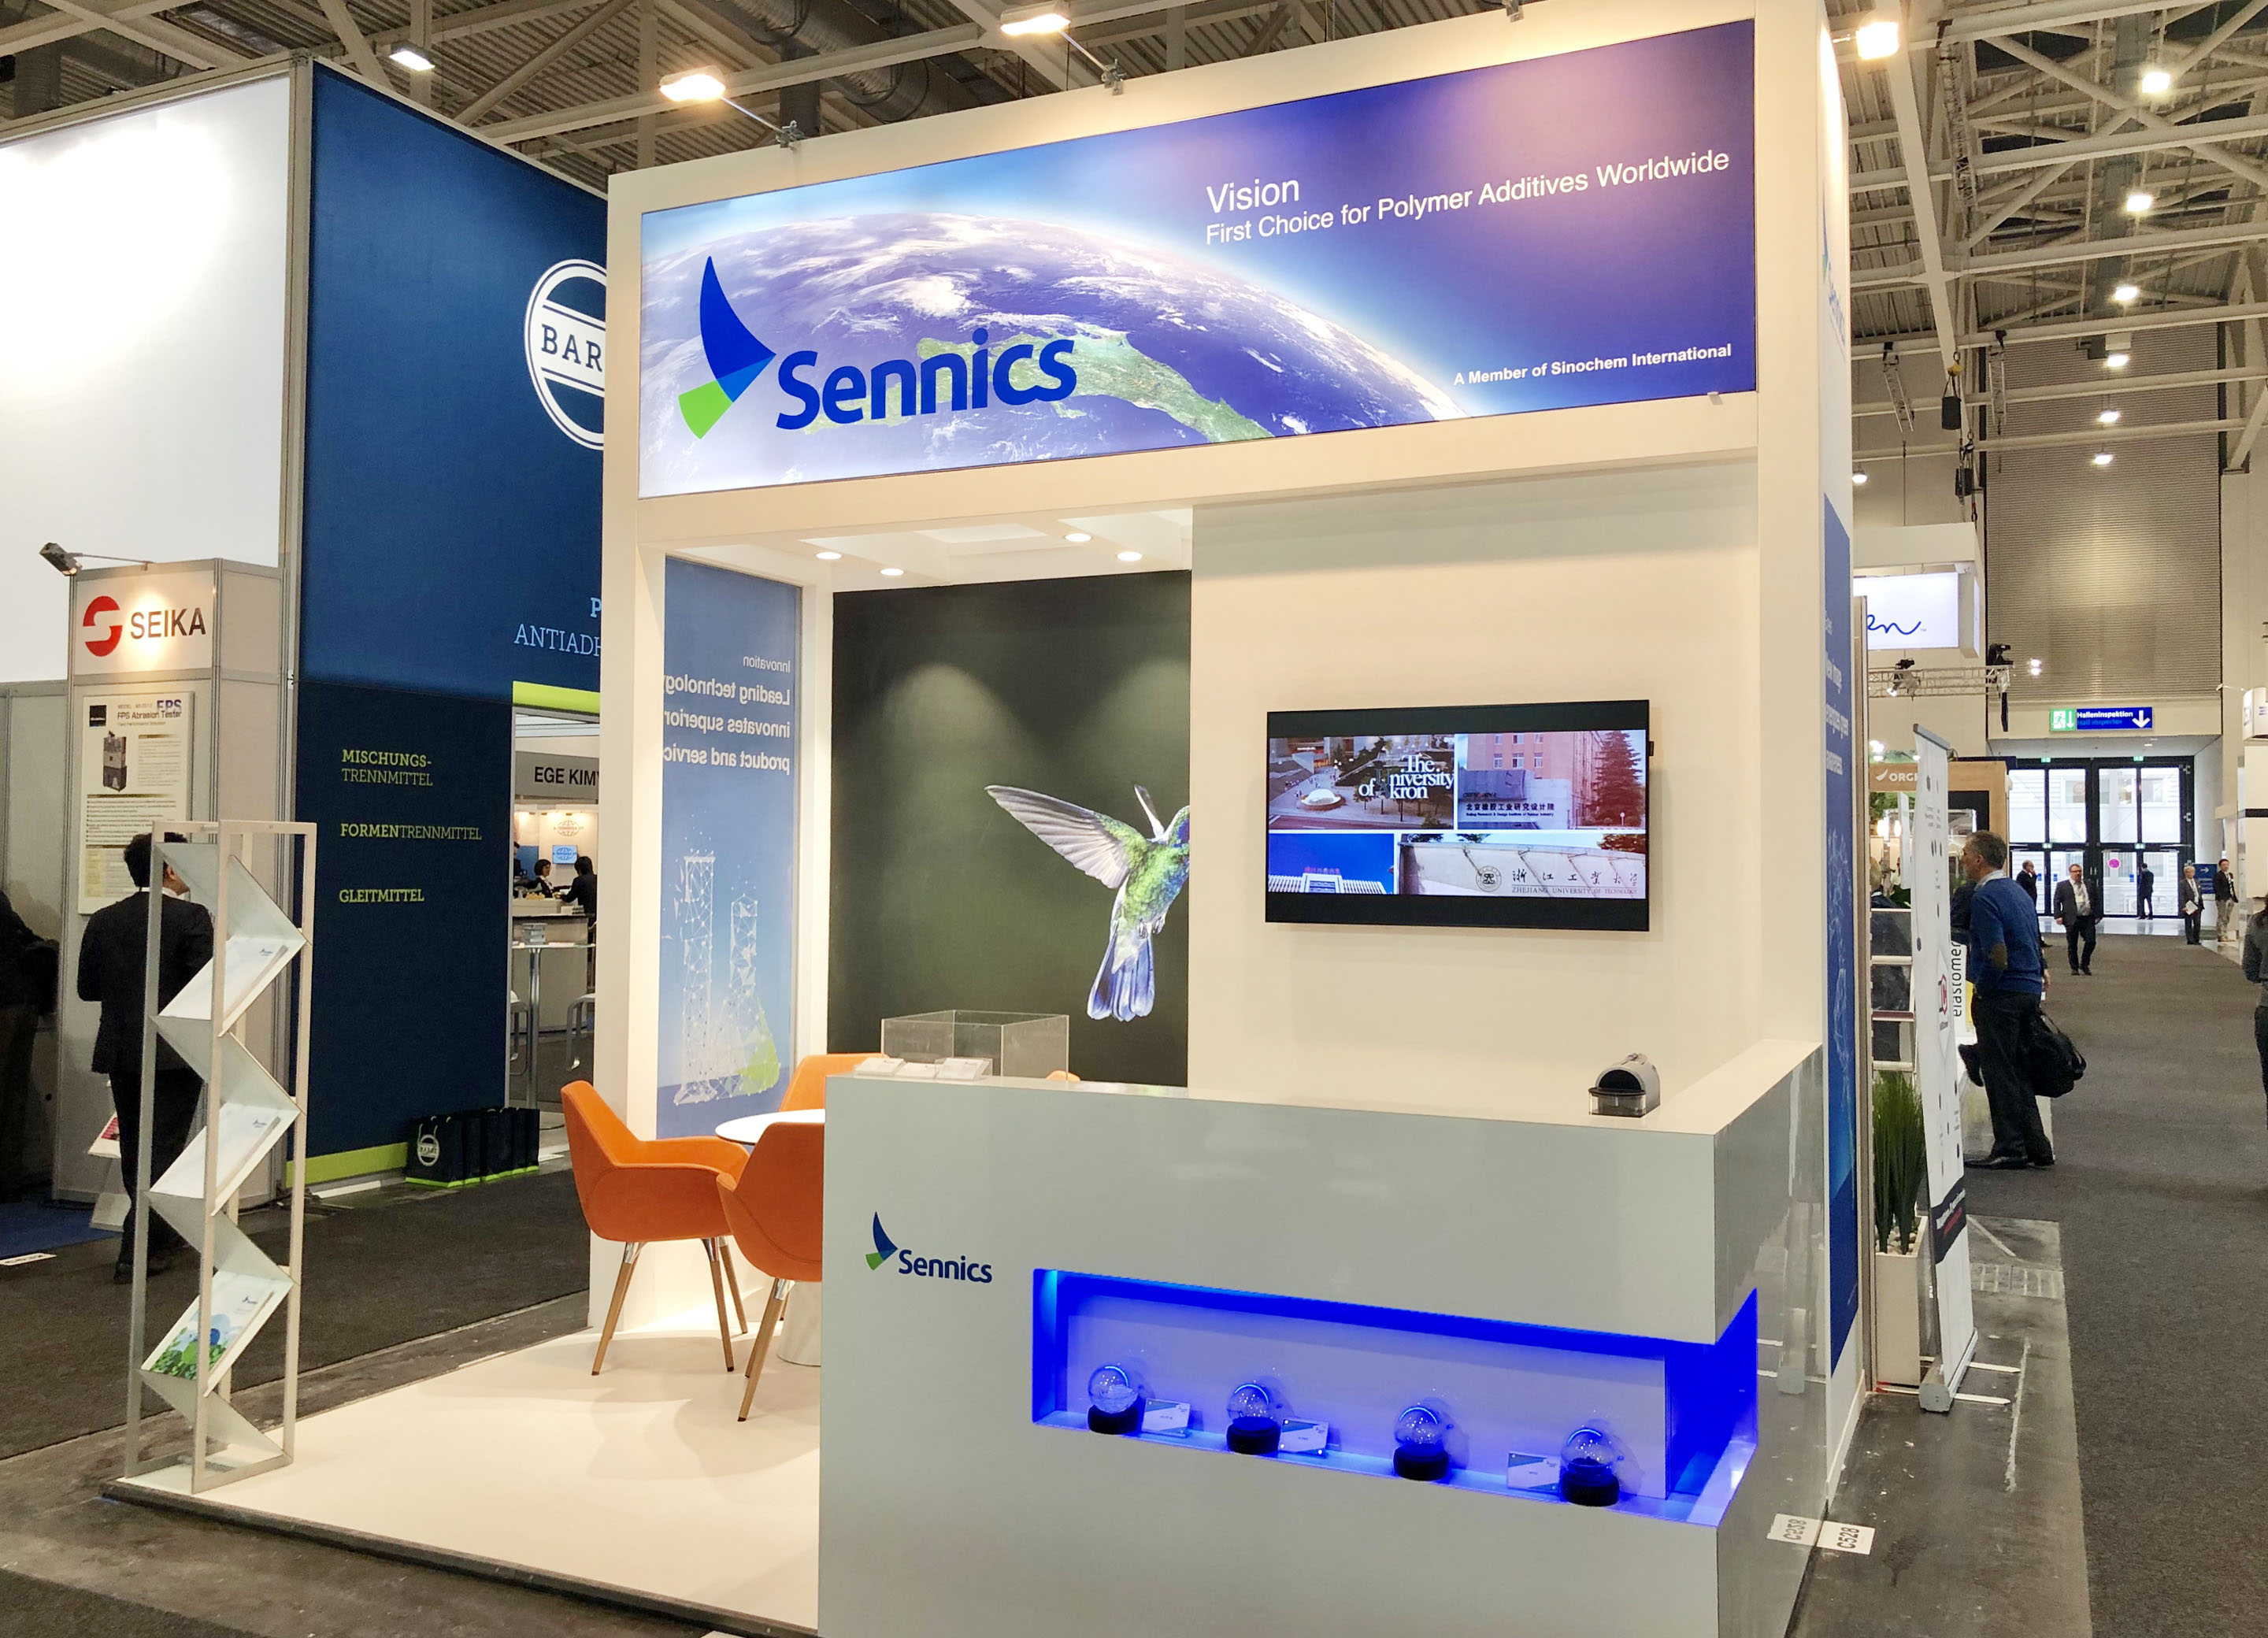 Sennics Attended and Delivered a Keynote Speech at the Tire Technology Expo in Hanover, Germany